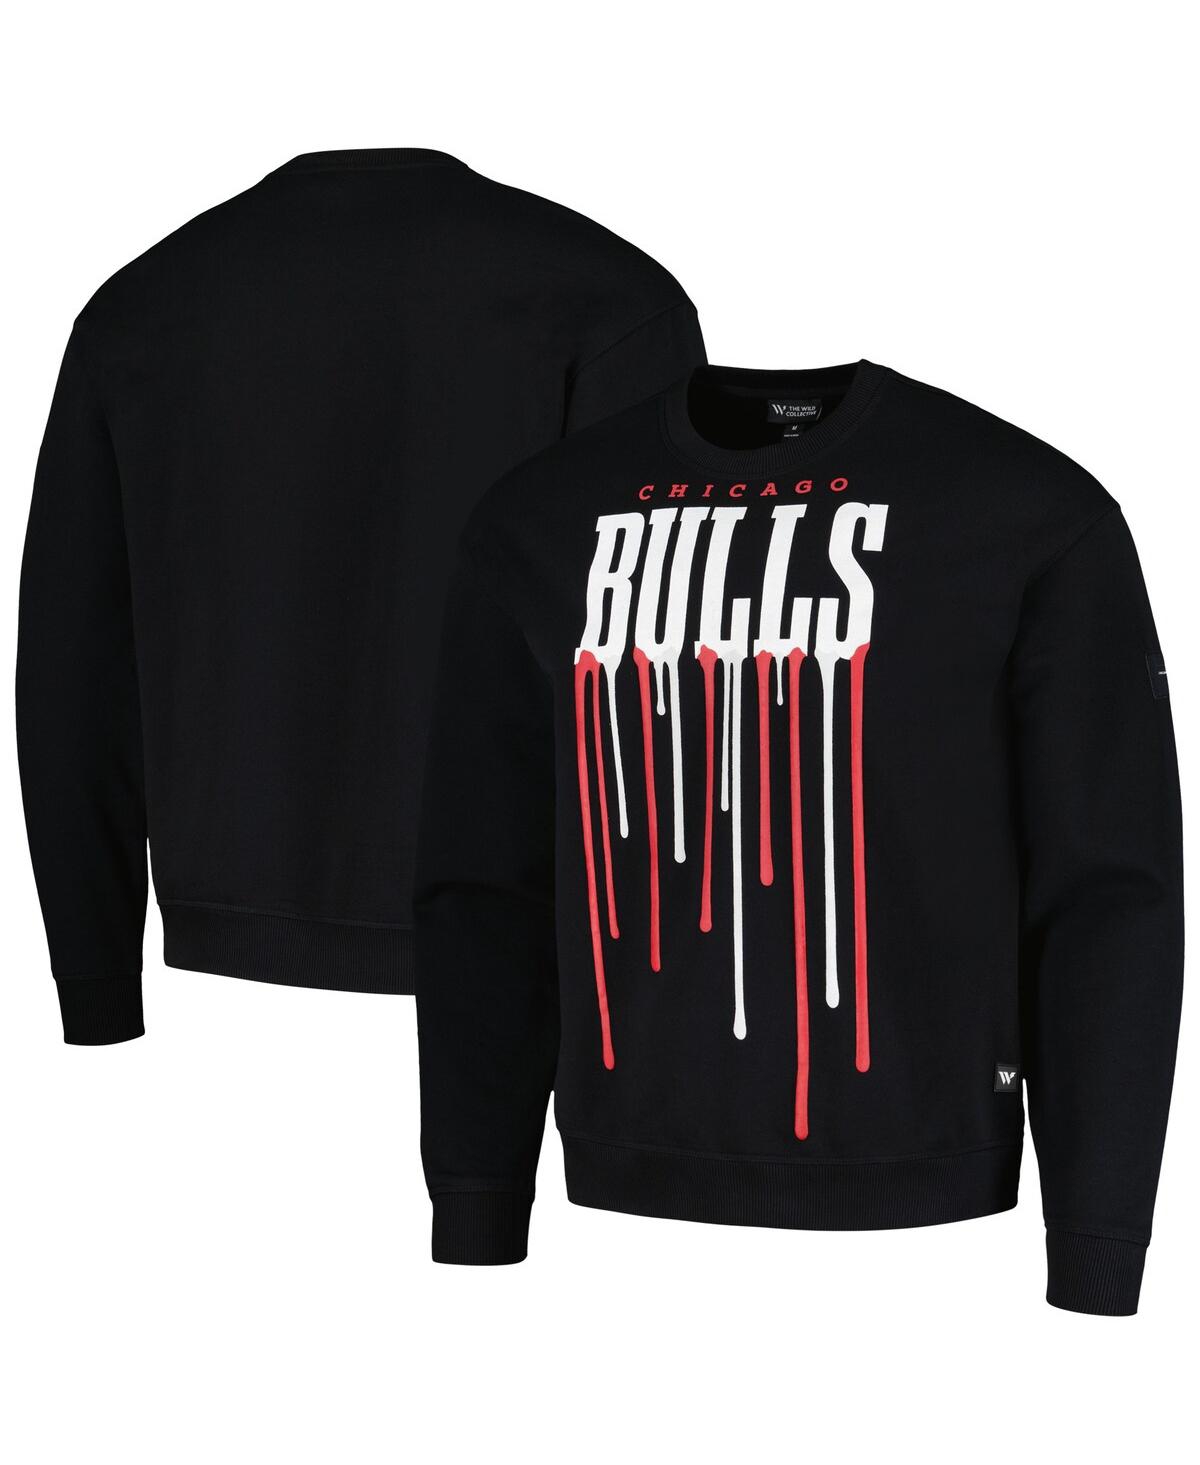 THE WILD COLLECTIVE MEN'S AND WOMEN'S THE WILD COLLECTIVE BLACK CHICAGO BULLS DRIPÂ PULLOVER SWEATSHIRT